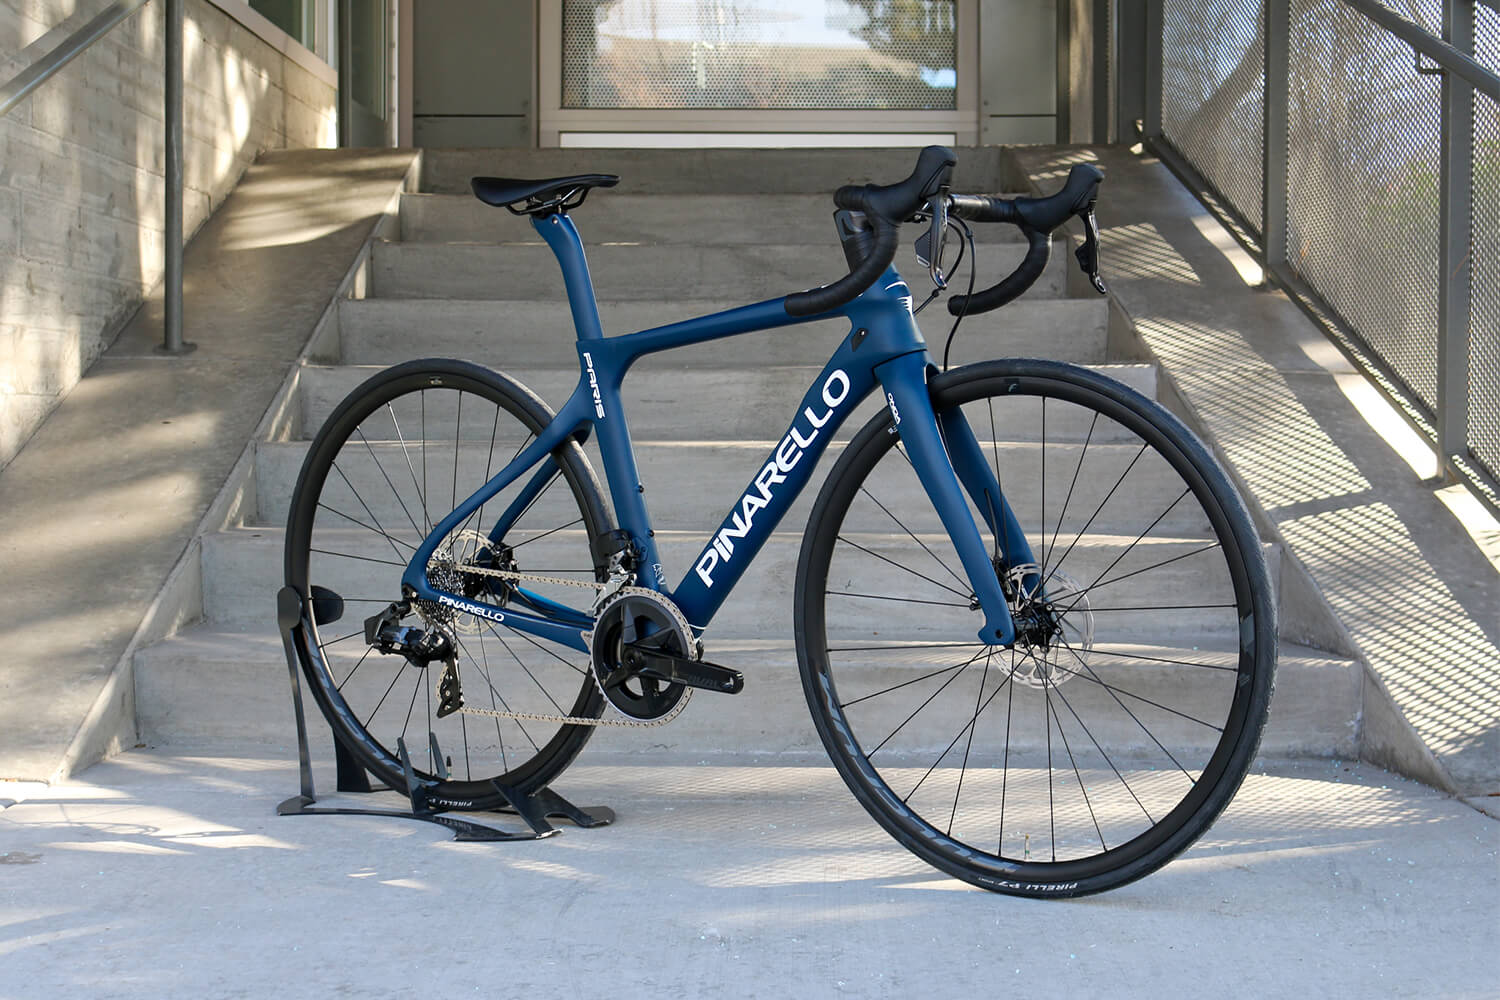 New Pinarello Paris Bike First Look Finding An All-Day Accord